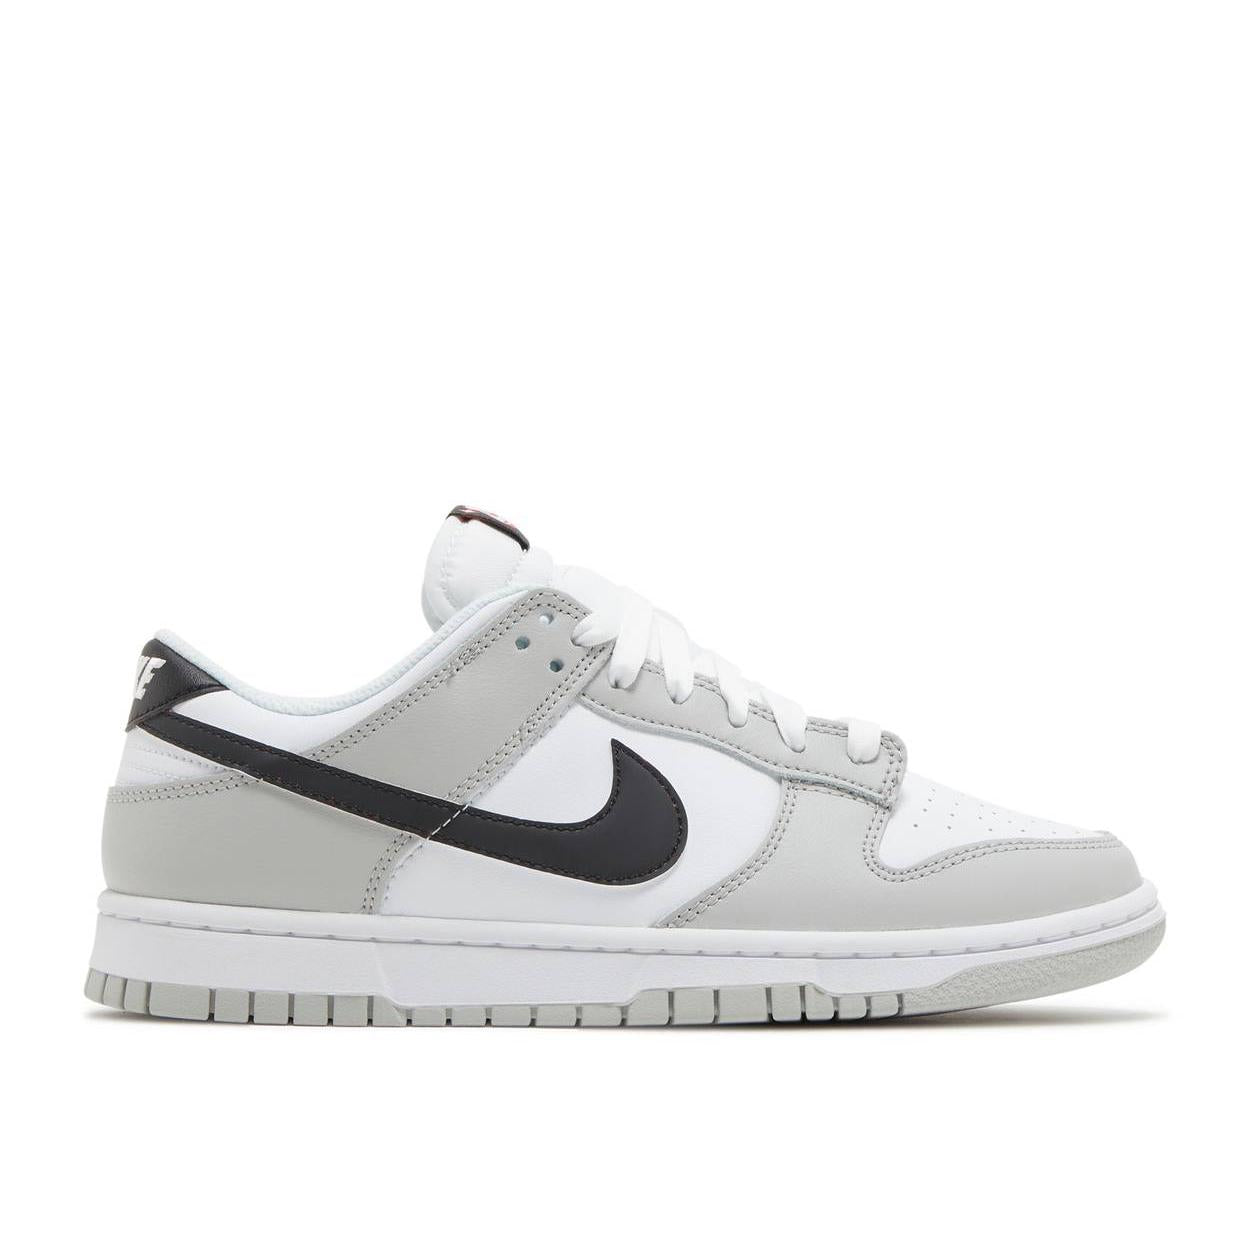 Nike Dunk Low SE Lottery Pack - Grey Fog